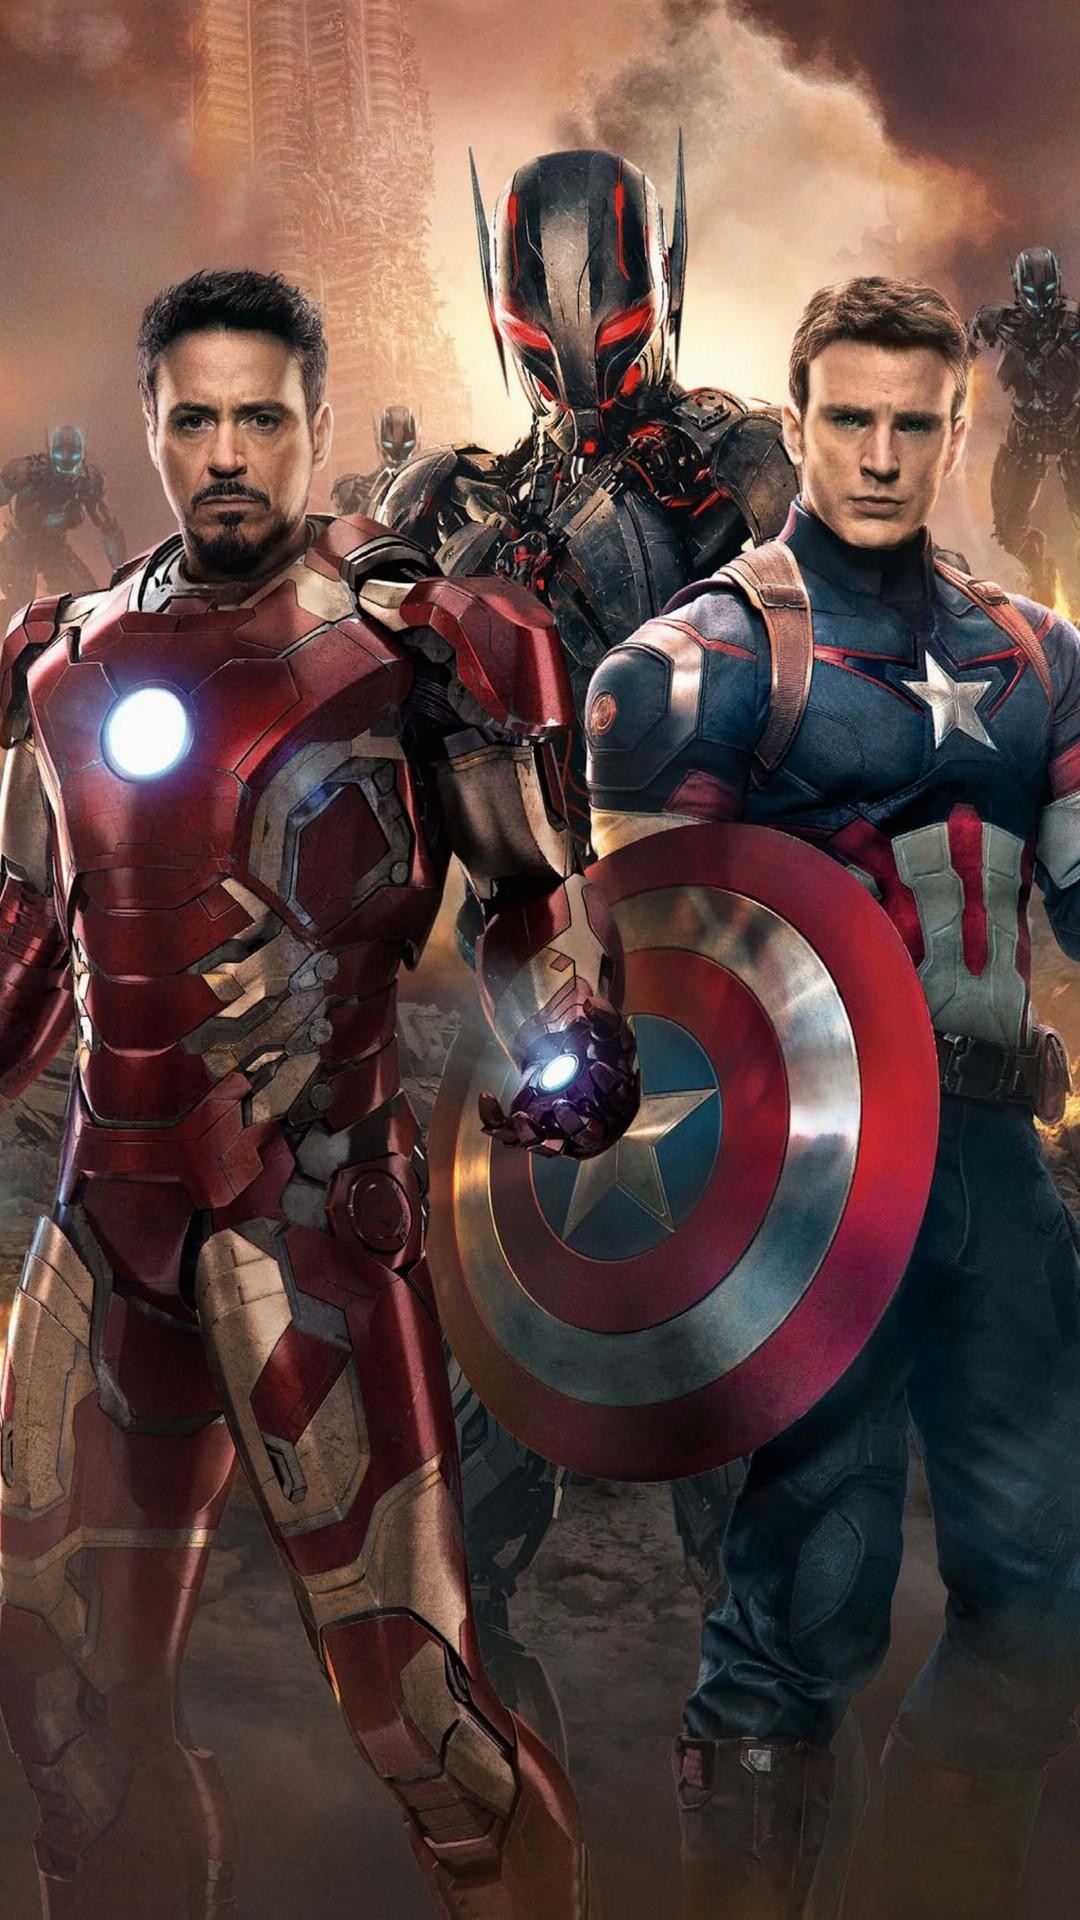 1080x1920 wallpaper.wiki-Cool-Avengers-Iphone-Background-PIC-WPC0010549